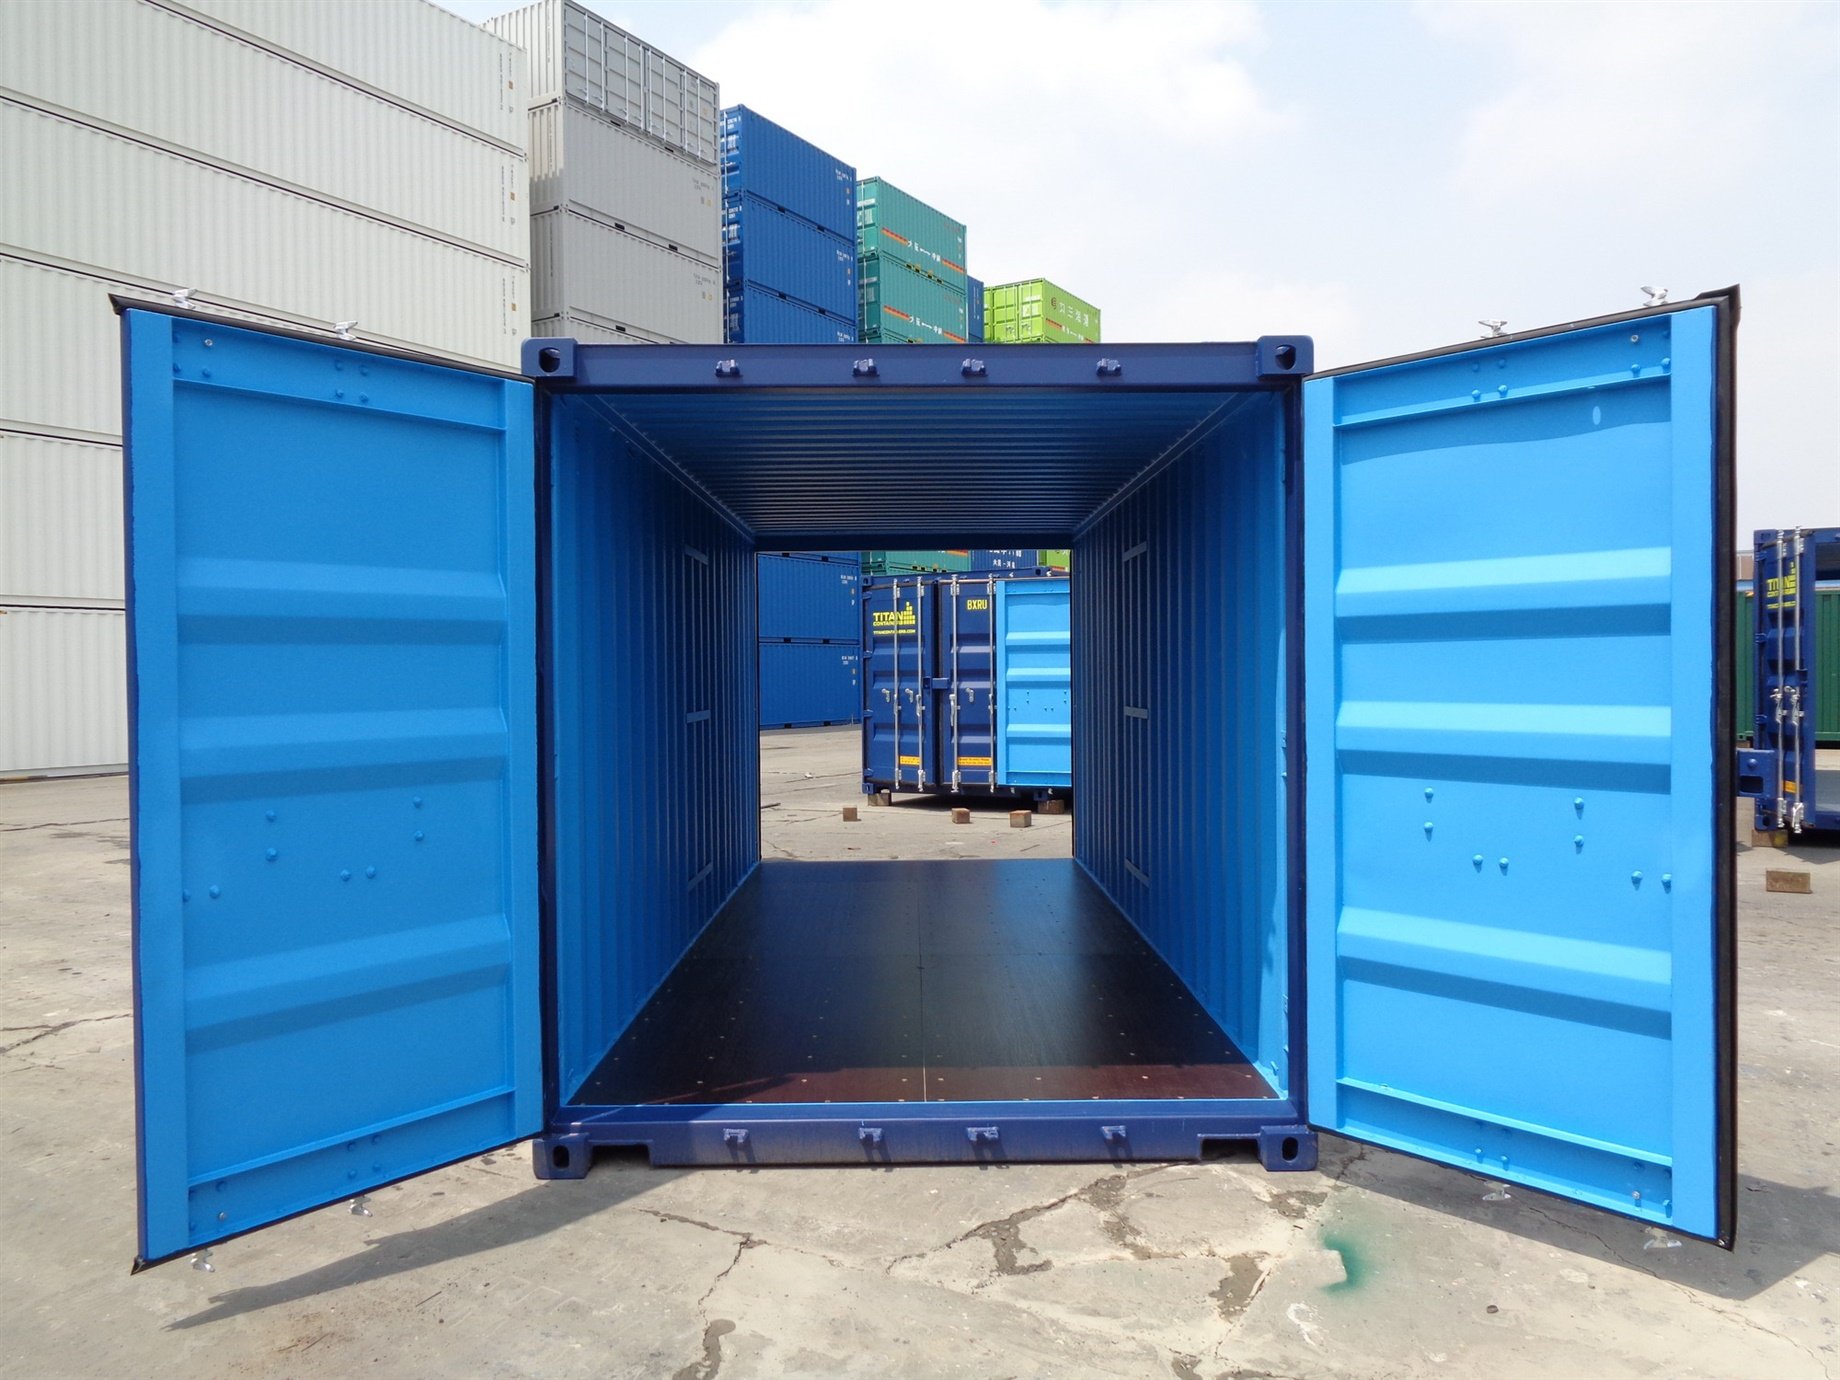 Container with doors on each end